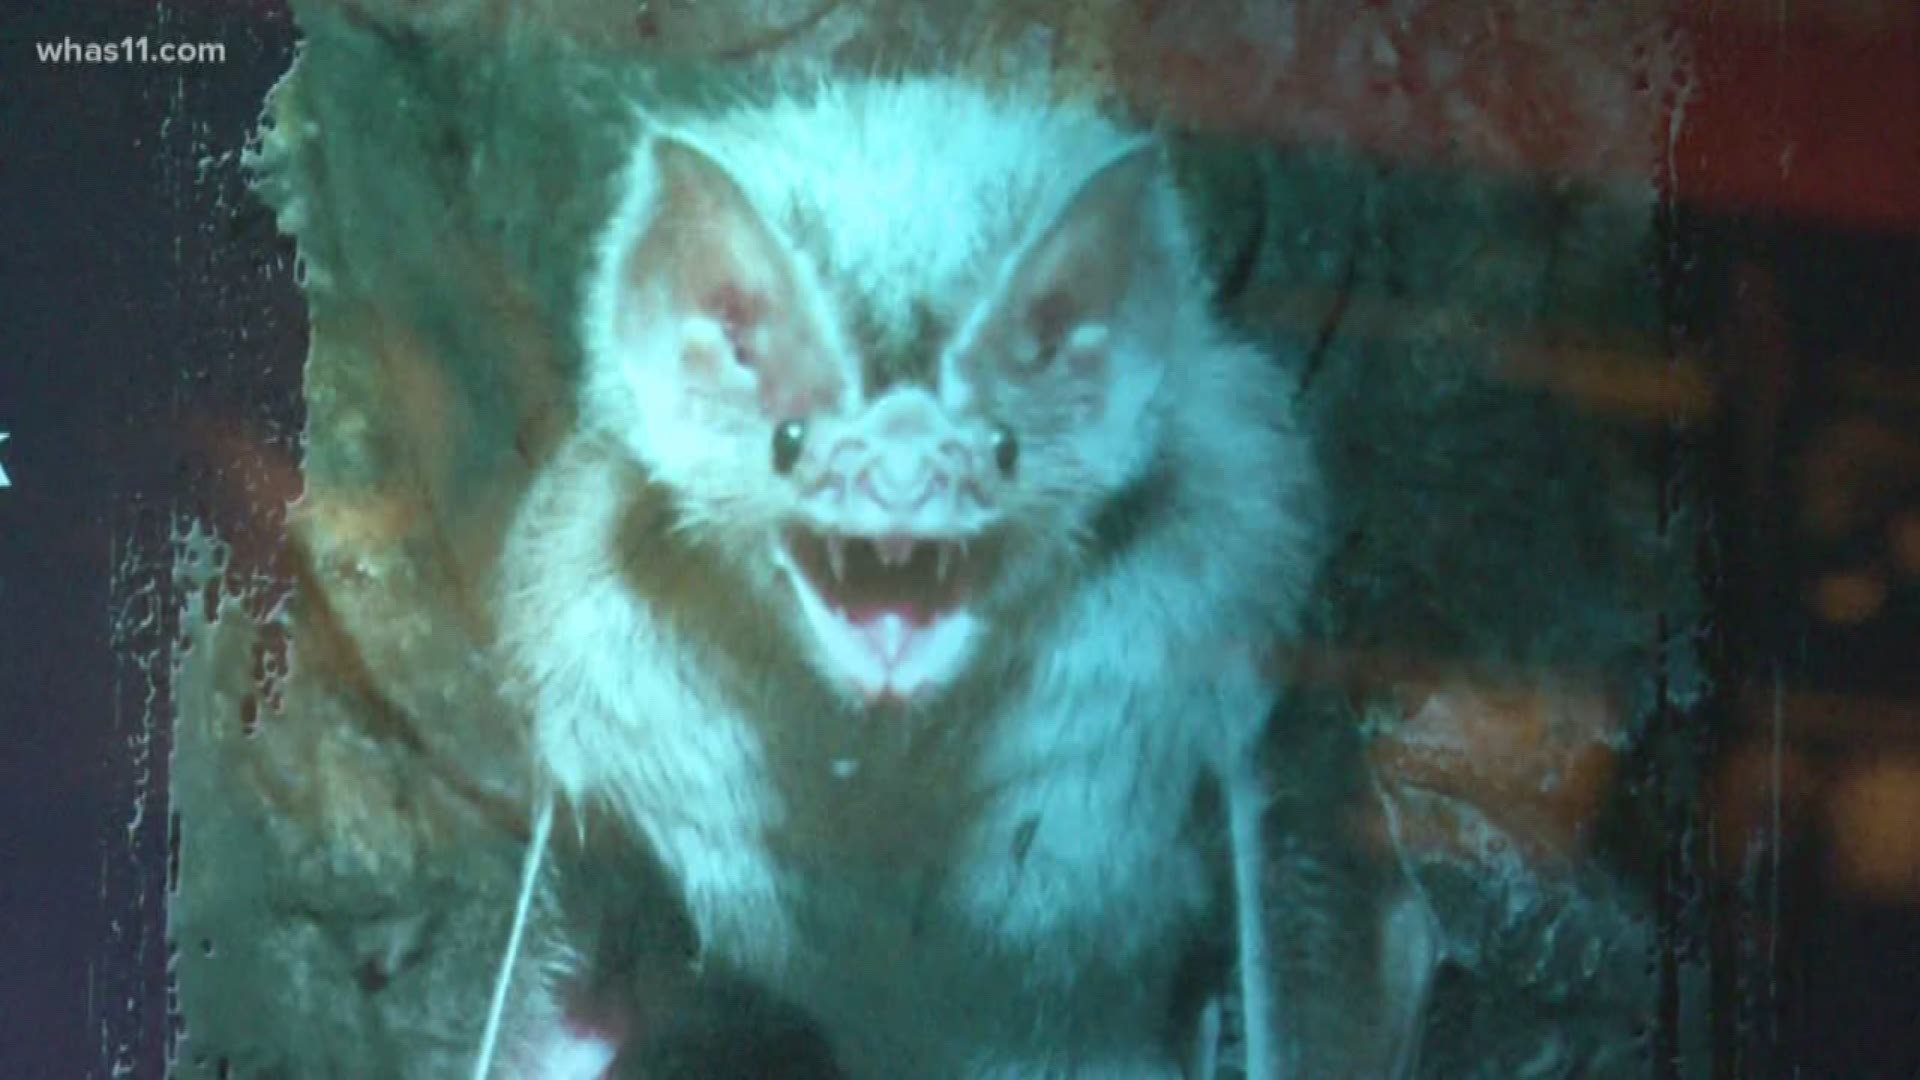 Vampire bats have a scary name, but the ones at the Louisville Zoo aren't a threat. Rob Harris shares some interesting facts about these creatures.